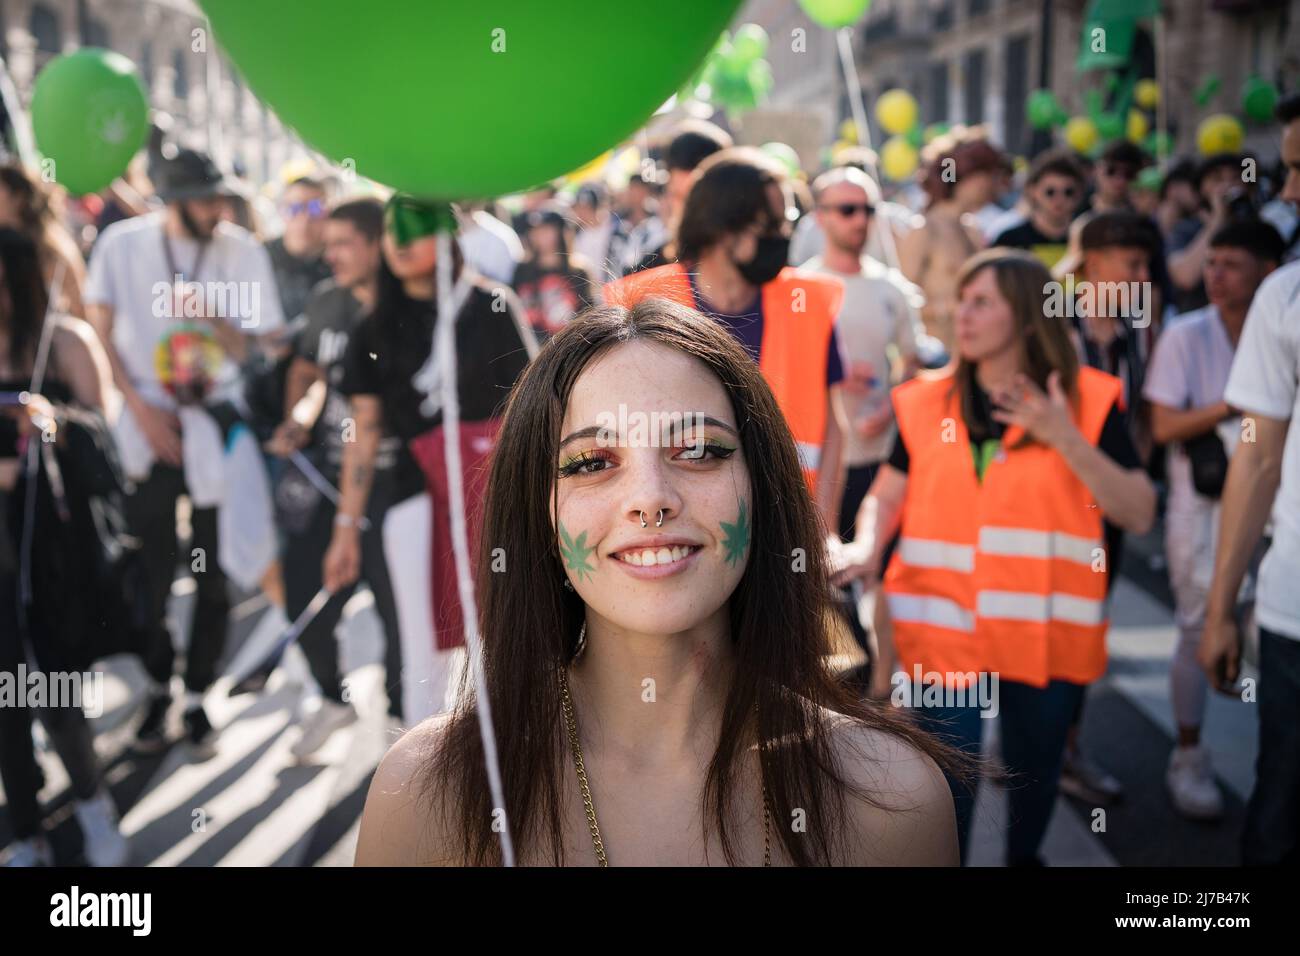 A pro-cannabis protester smiles during a demonstration in the center of Madrid. Thousands of pro-cannabis activists took part in a demonstration in La Gran Via in Madrid, Spain, in favor of legalizing the medicinal and recreational use of marijuana. (Photo by Diego Radames / SOPA Images/Sipa USA) Stock Photo